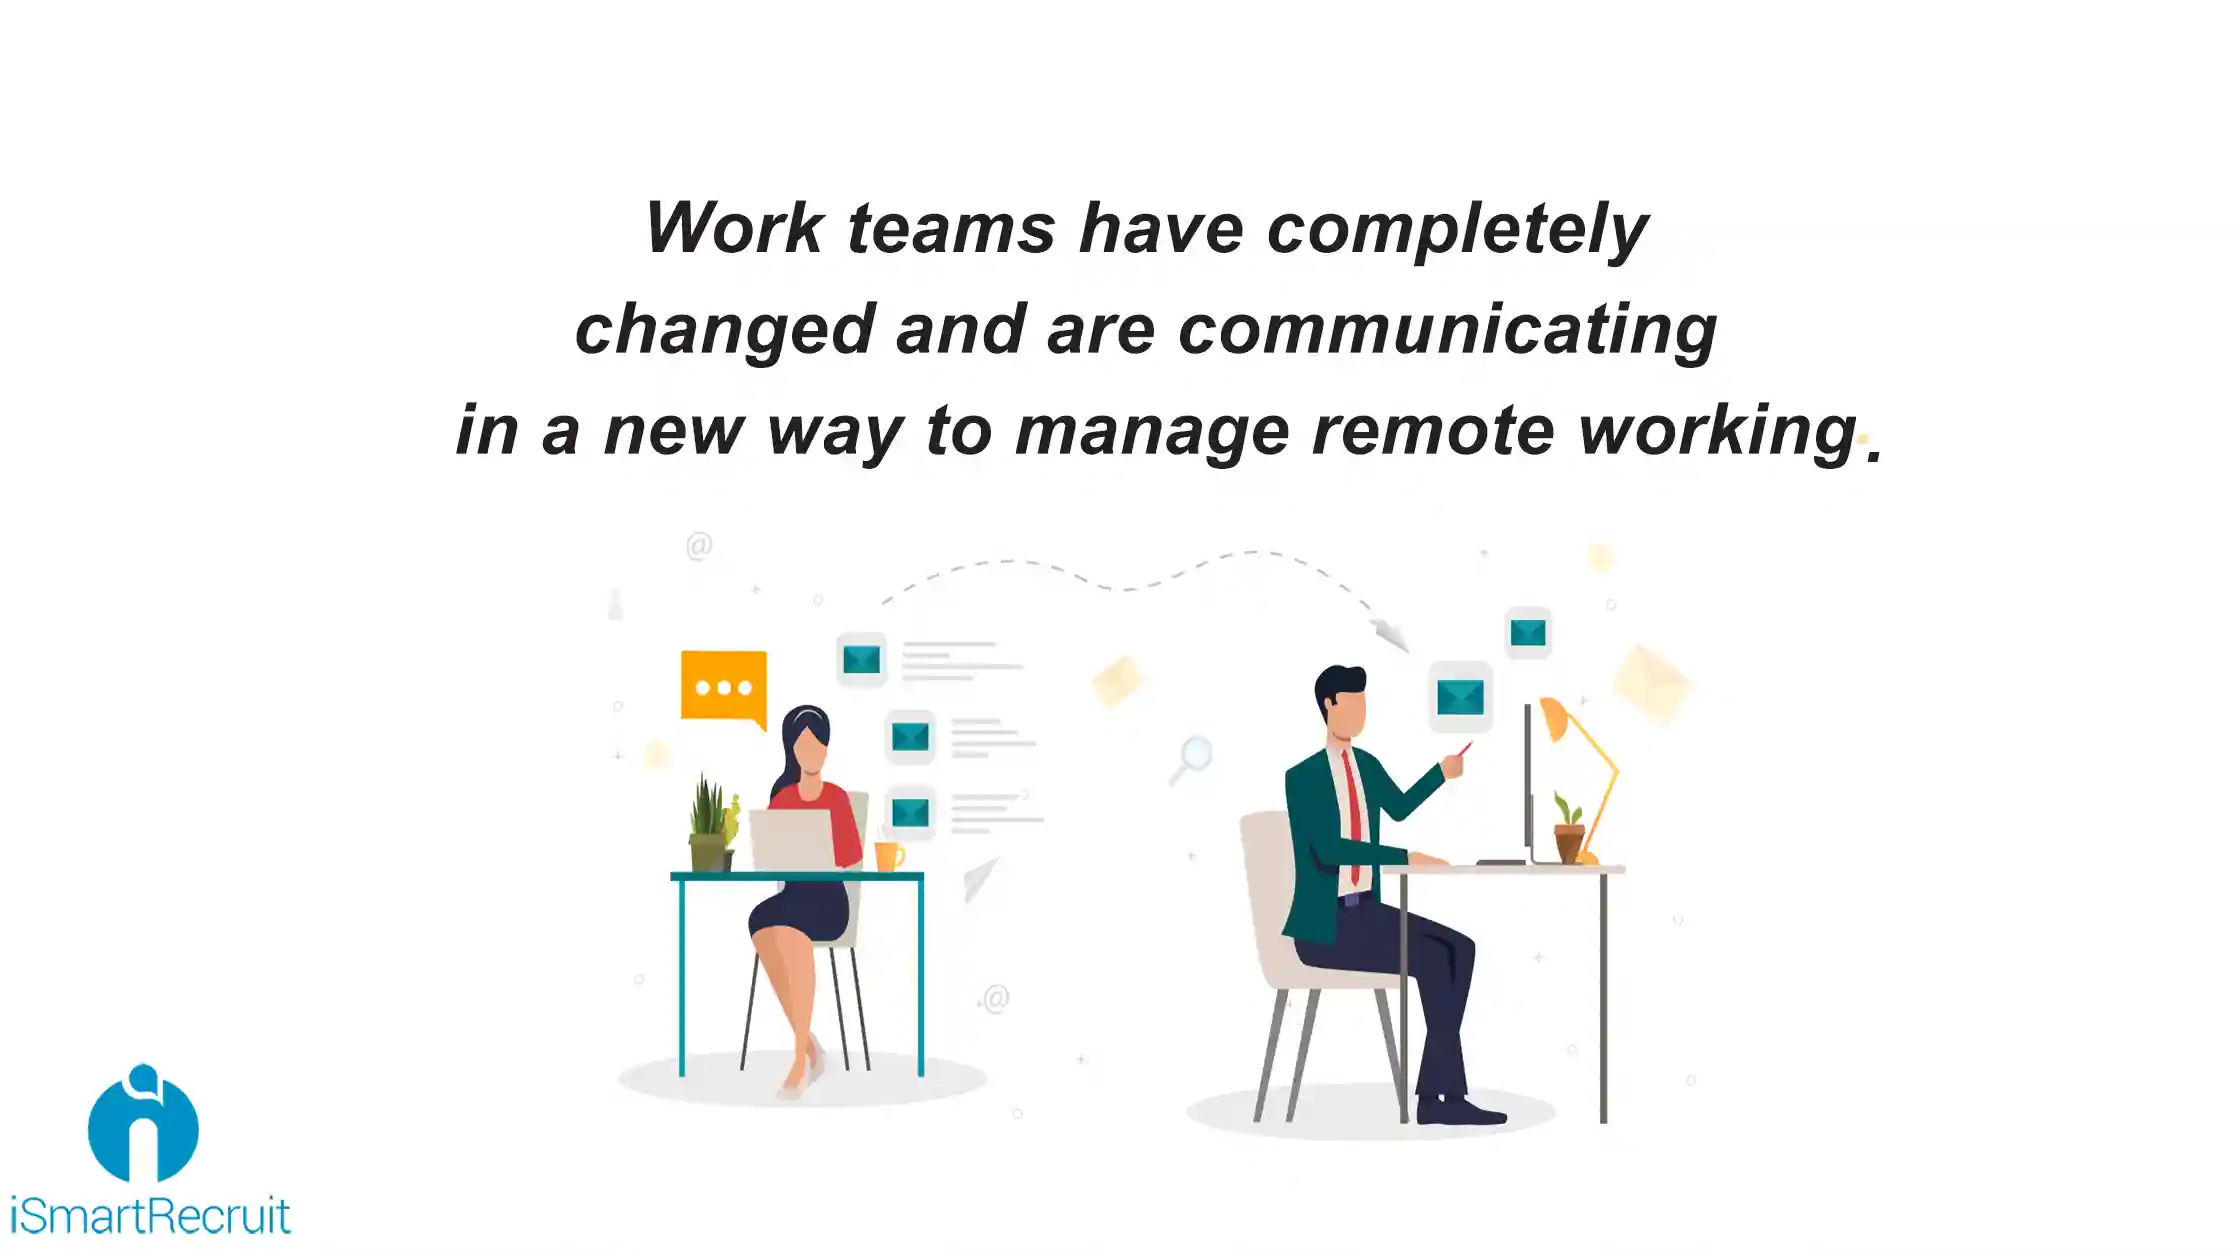 Work teams have completely changed